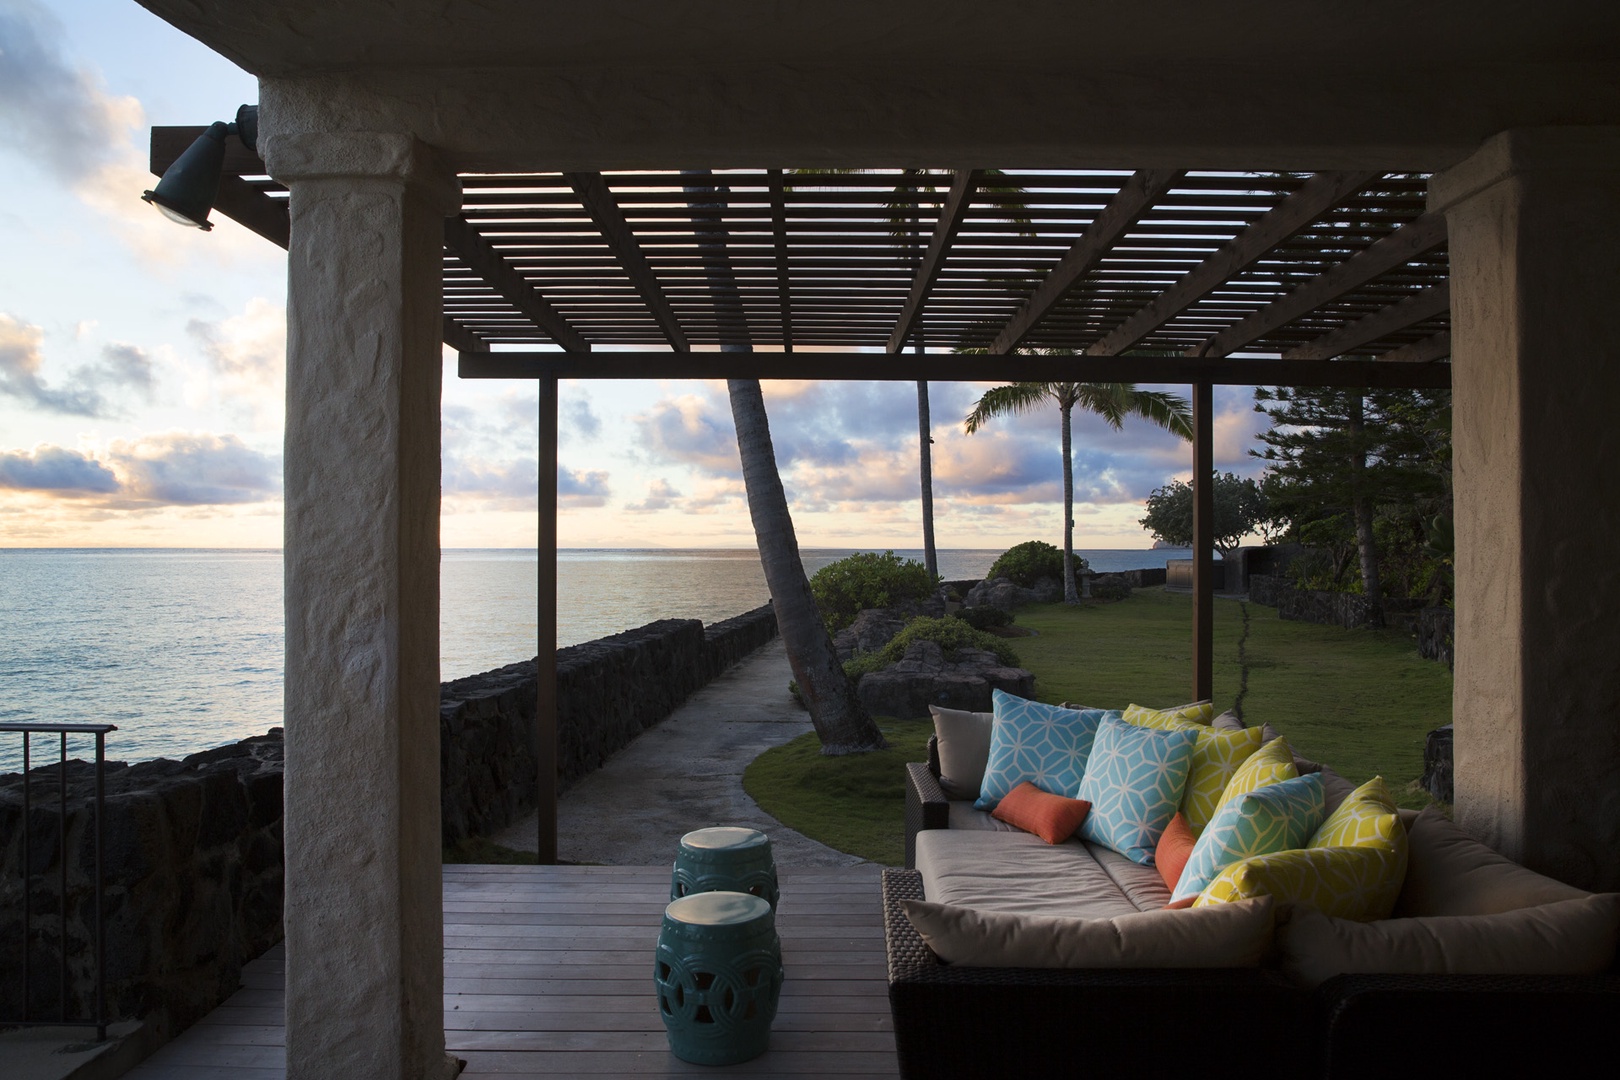 Kailua Vacation Rentals, Lanikai Village* - The Villa at Wailea Point: Grab a seat and take in the sunset views.